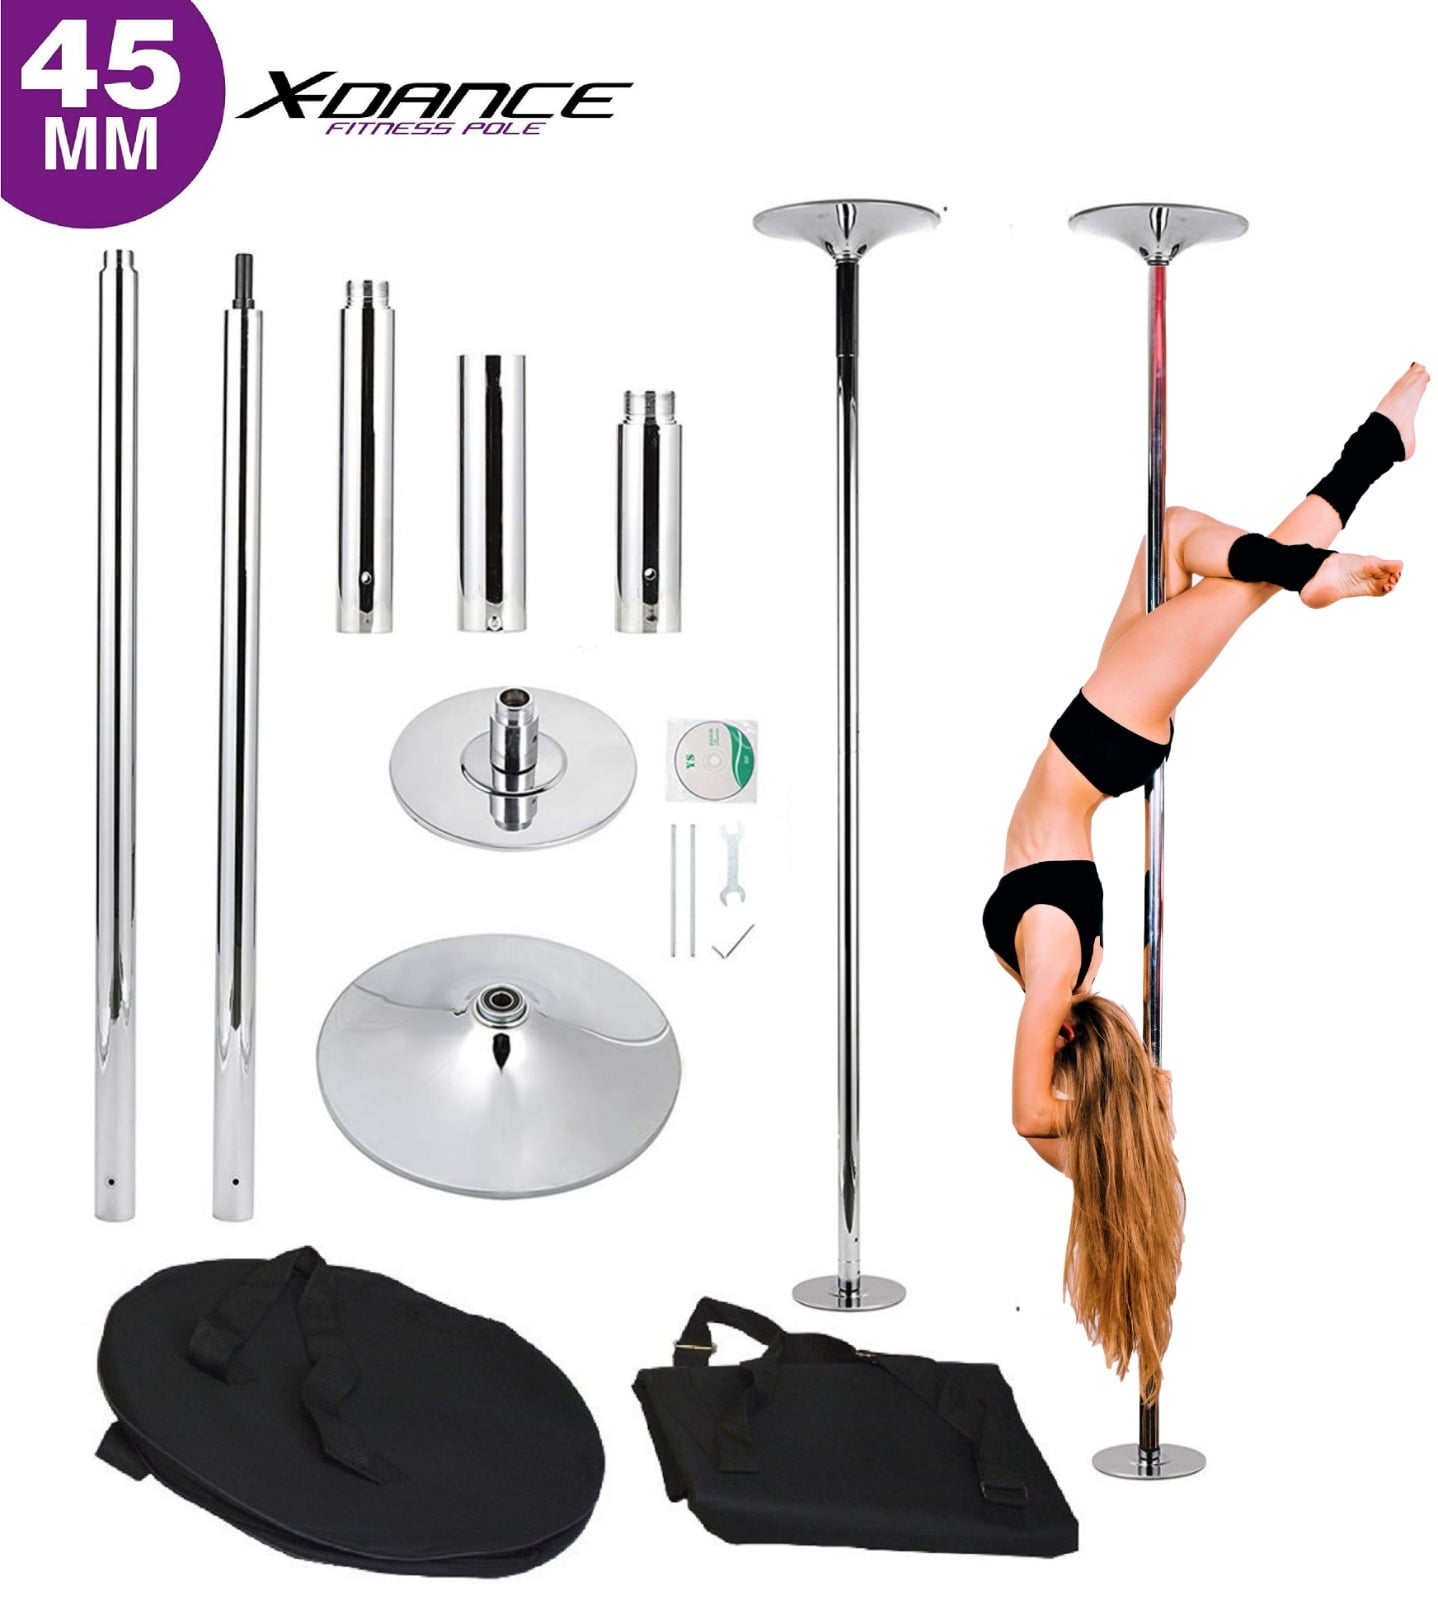 85-111 Adjustable Height Raylon Spinning and Static Dancing Pole Fitness Exercise Dance Tube for Home Pub Party Gym 45mm Diameter Portable Stripper Pole